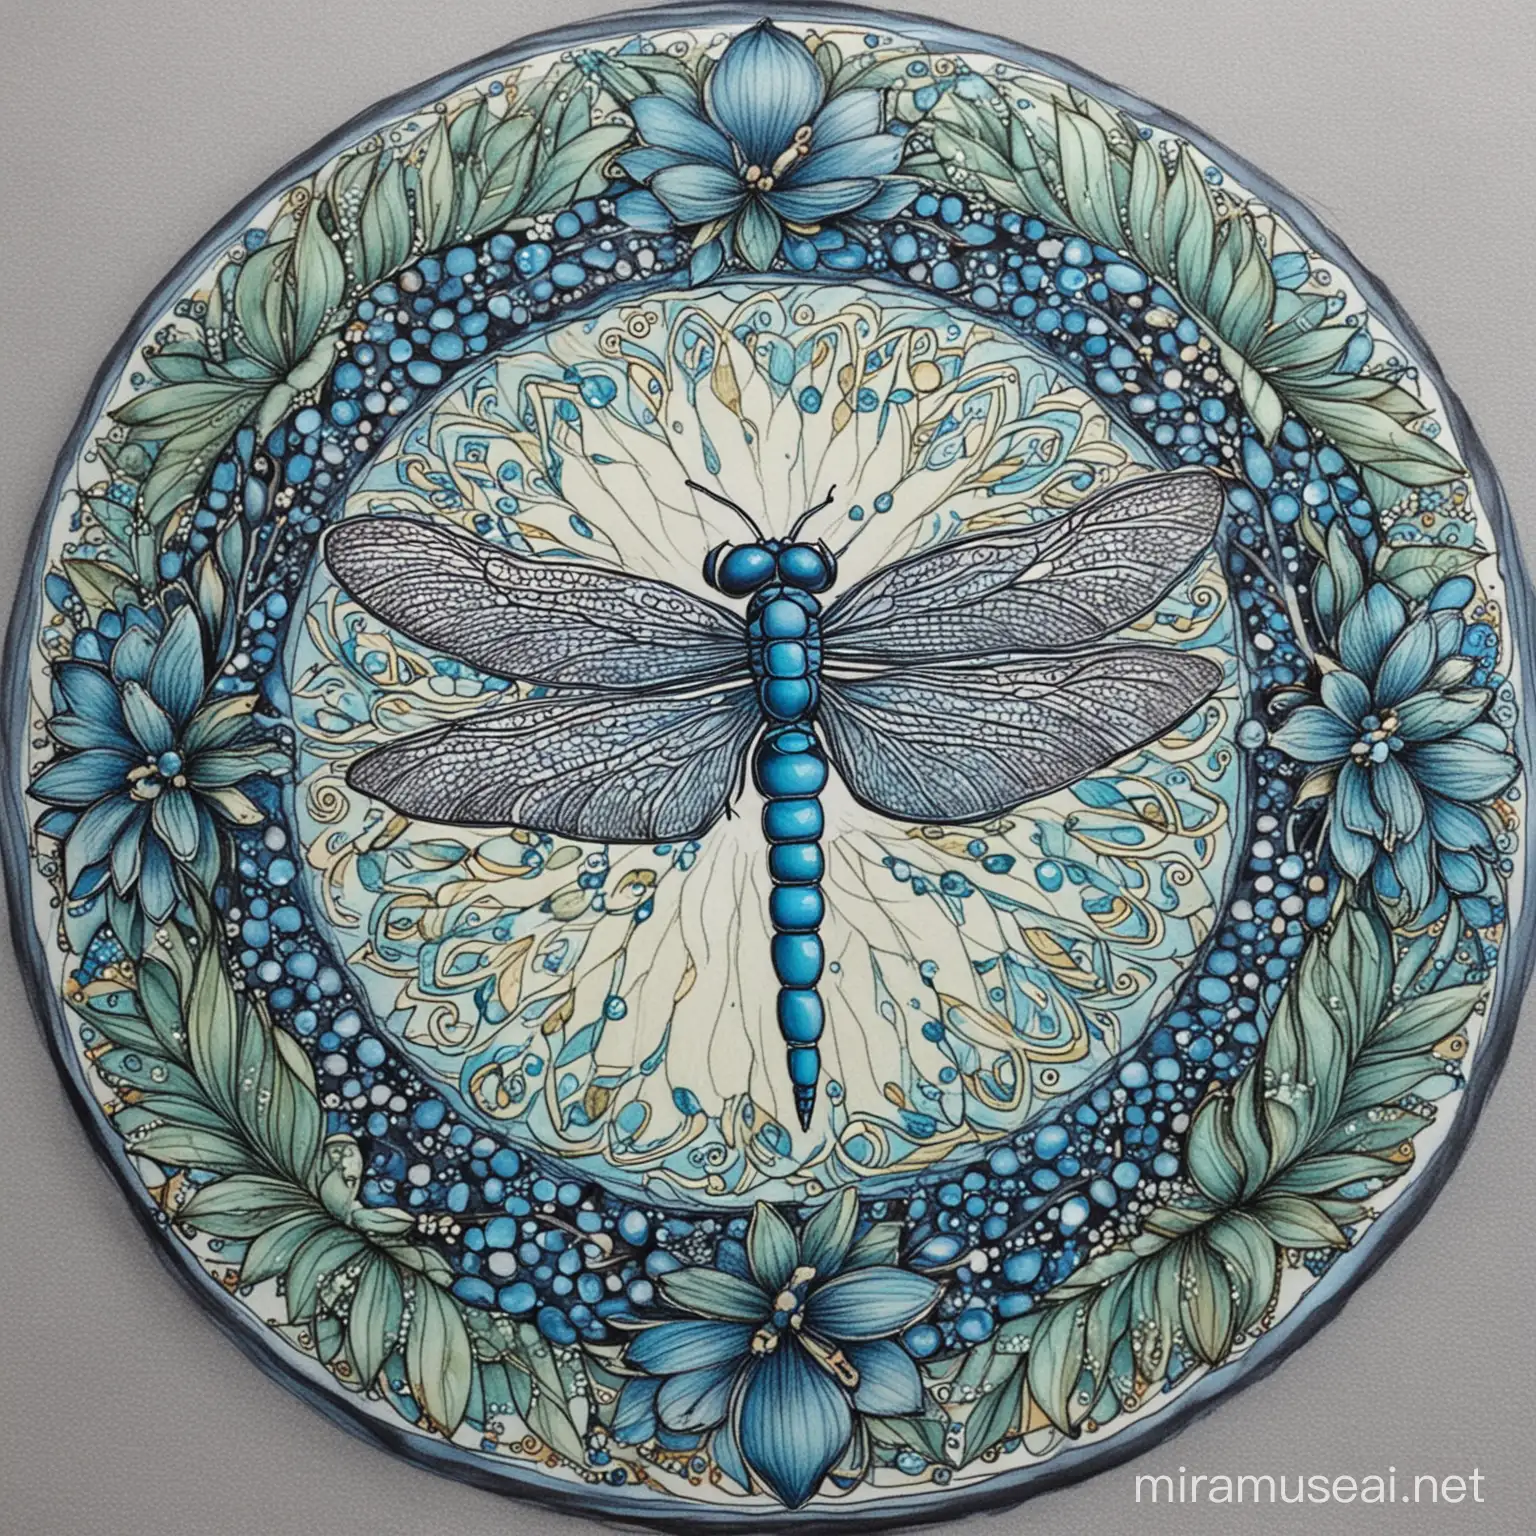 Blue Dragonfly Mandala with Floral Ornaments